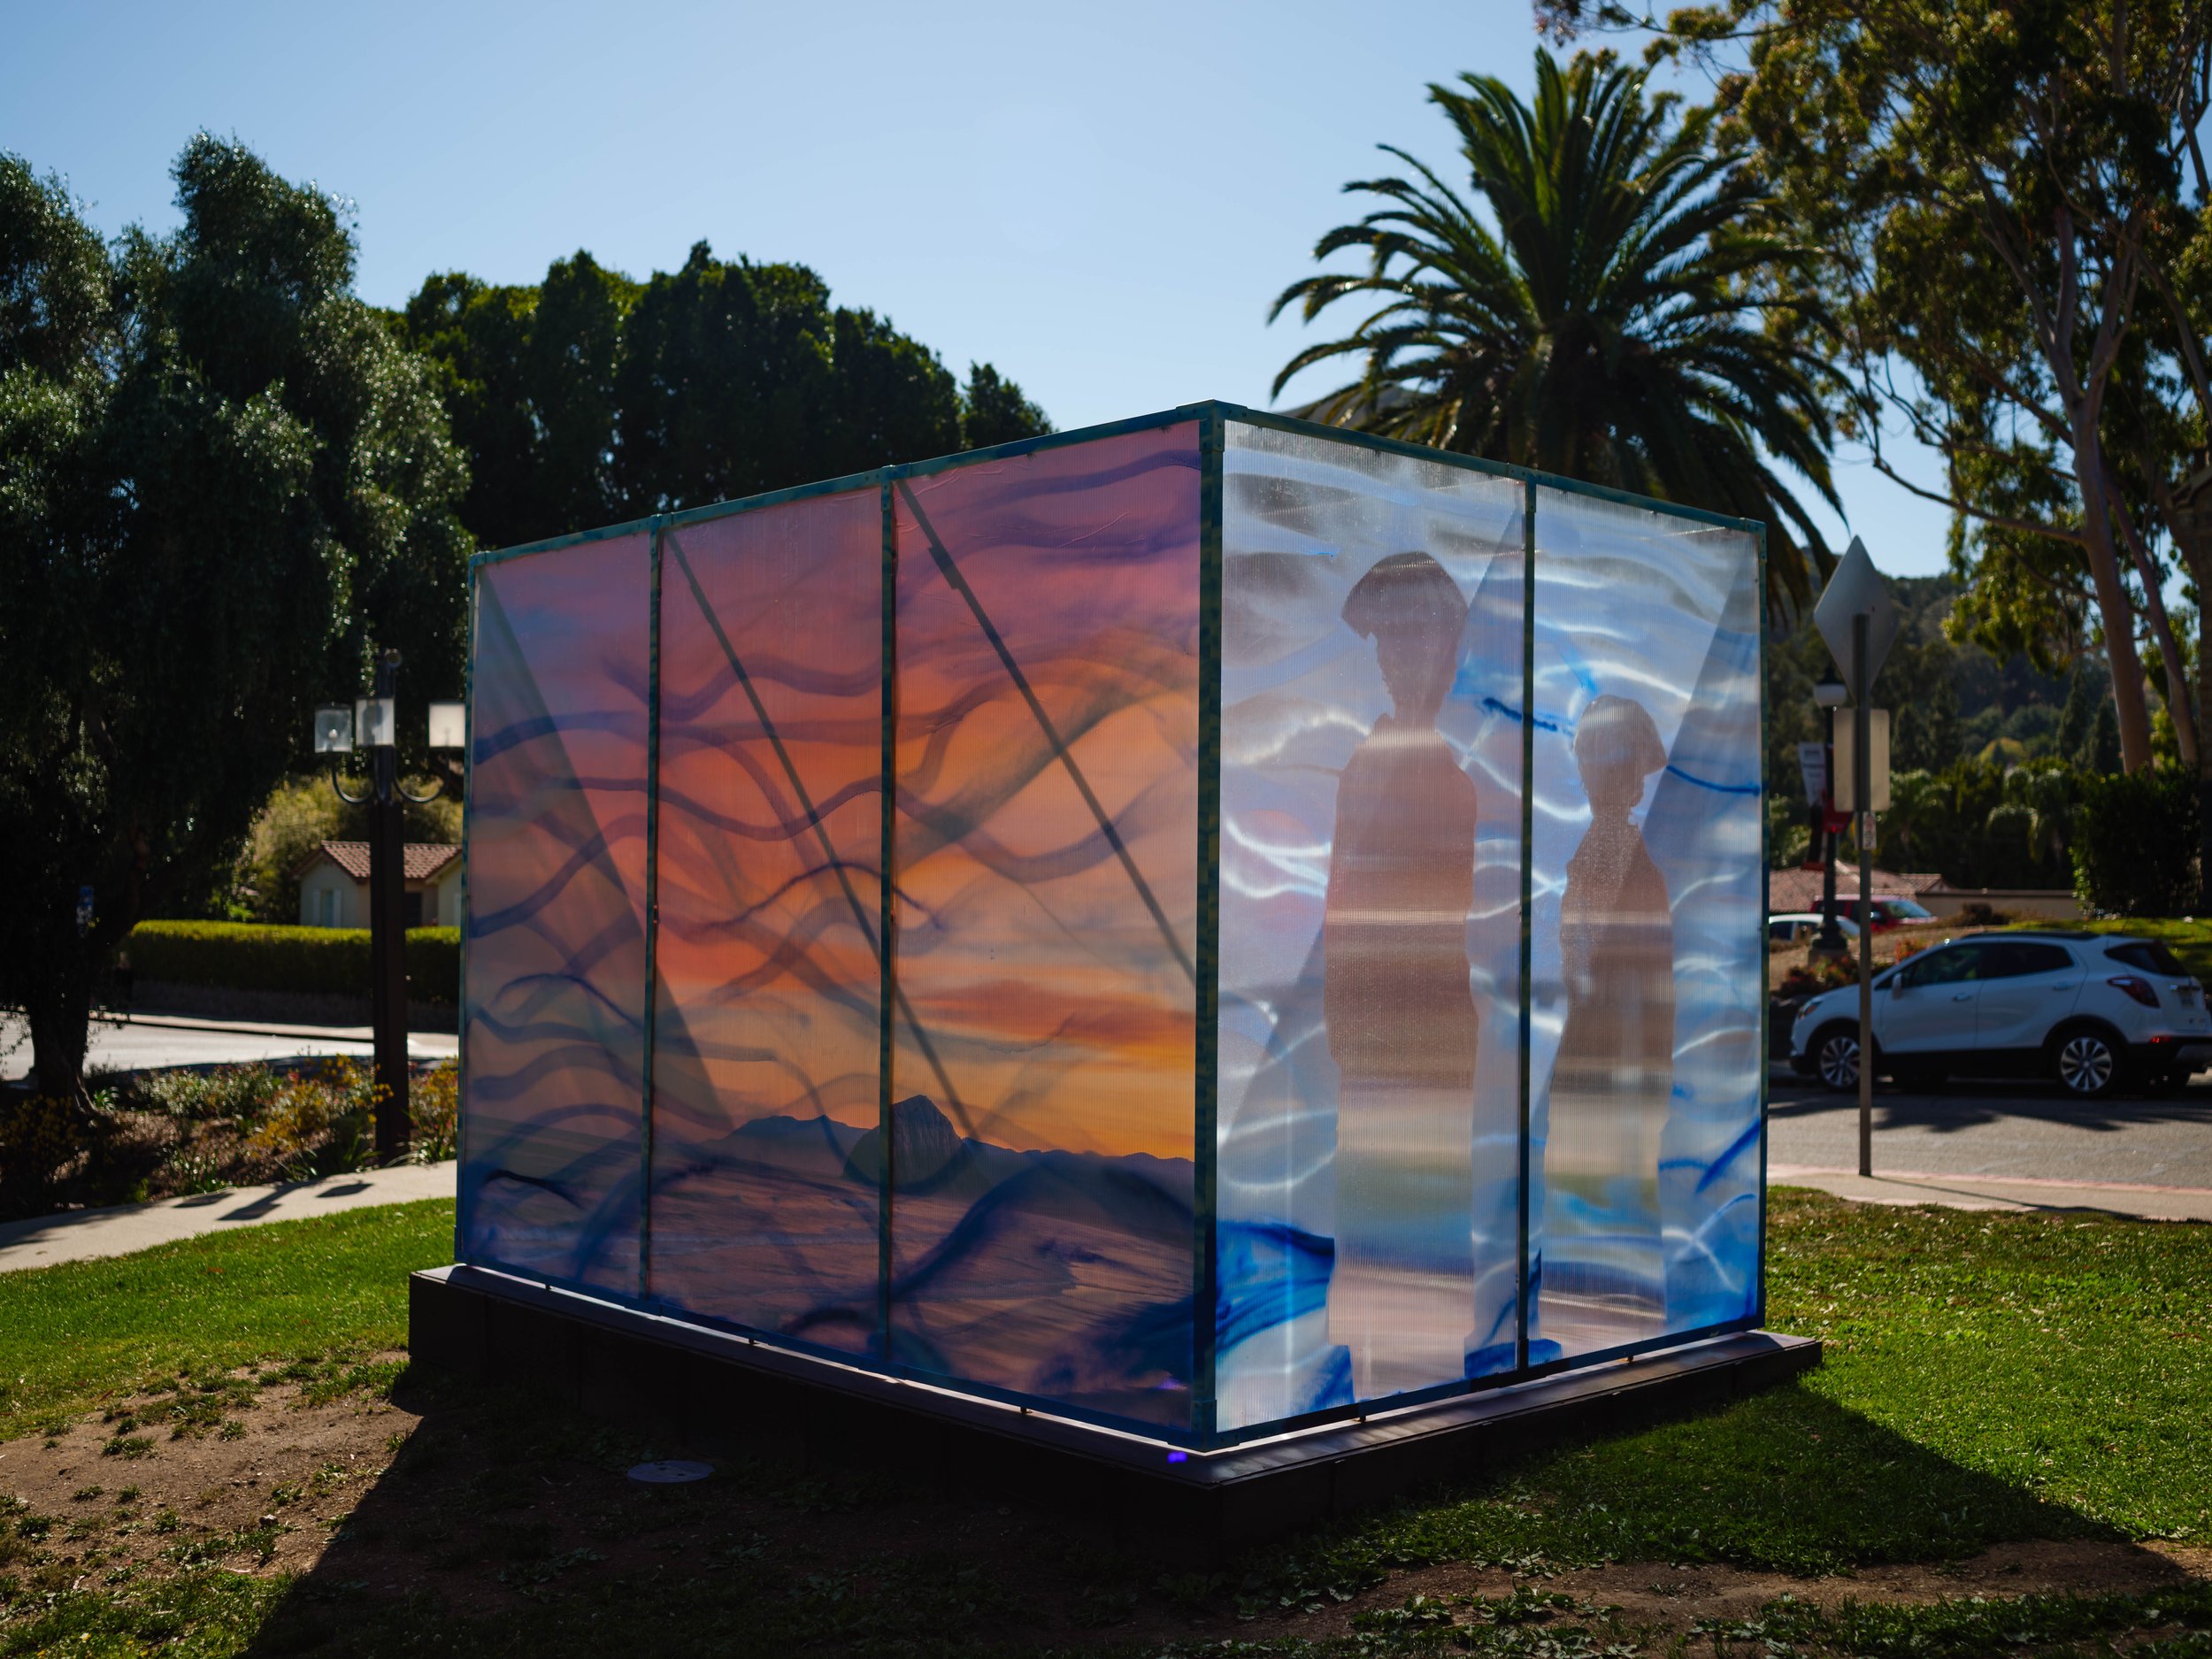   Storied Waters: Dreams of Bayanihan , 2022. Public sculpture commissioned by the City of San Luis Obispo  and the San Luis Obispo Museum of Art.     More info here.    Photo: Stephen Heraldo 